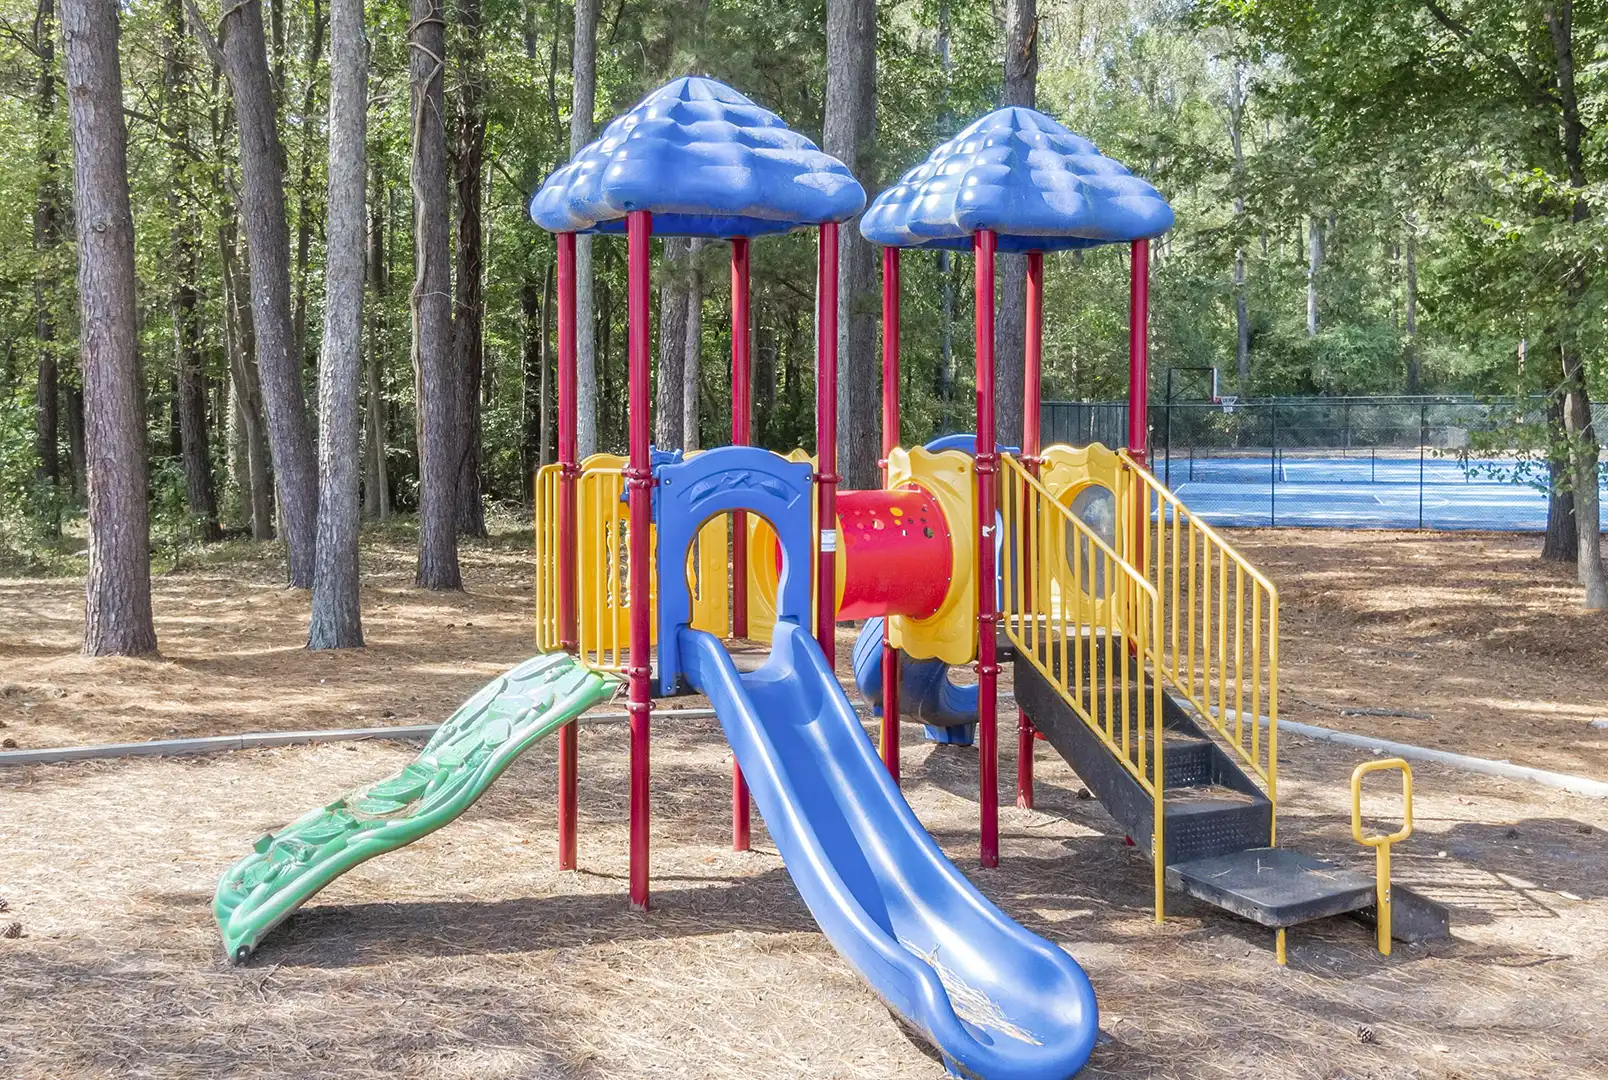 Playground in wooded area near tennis courts